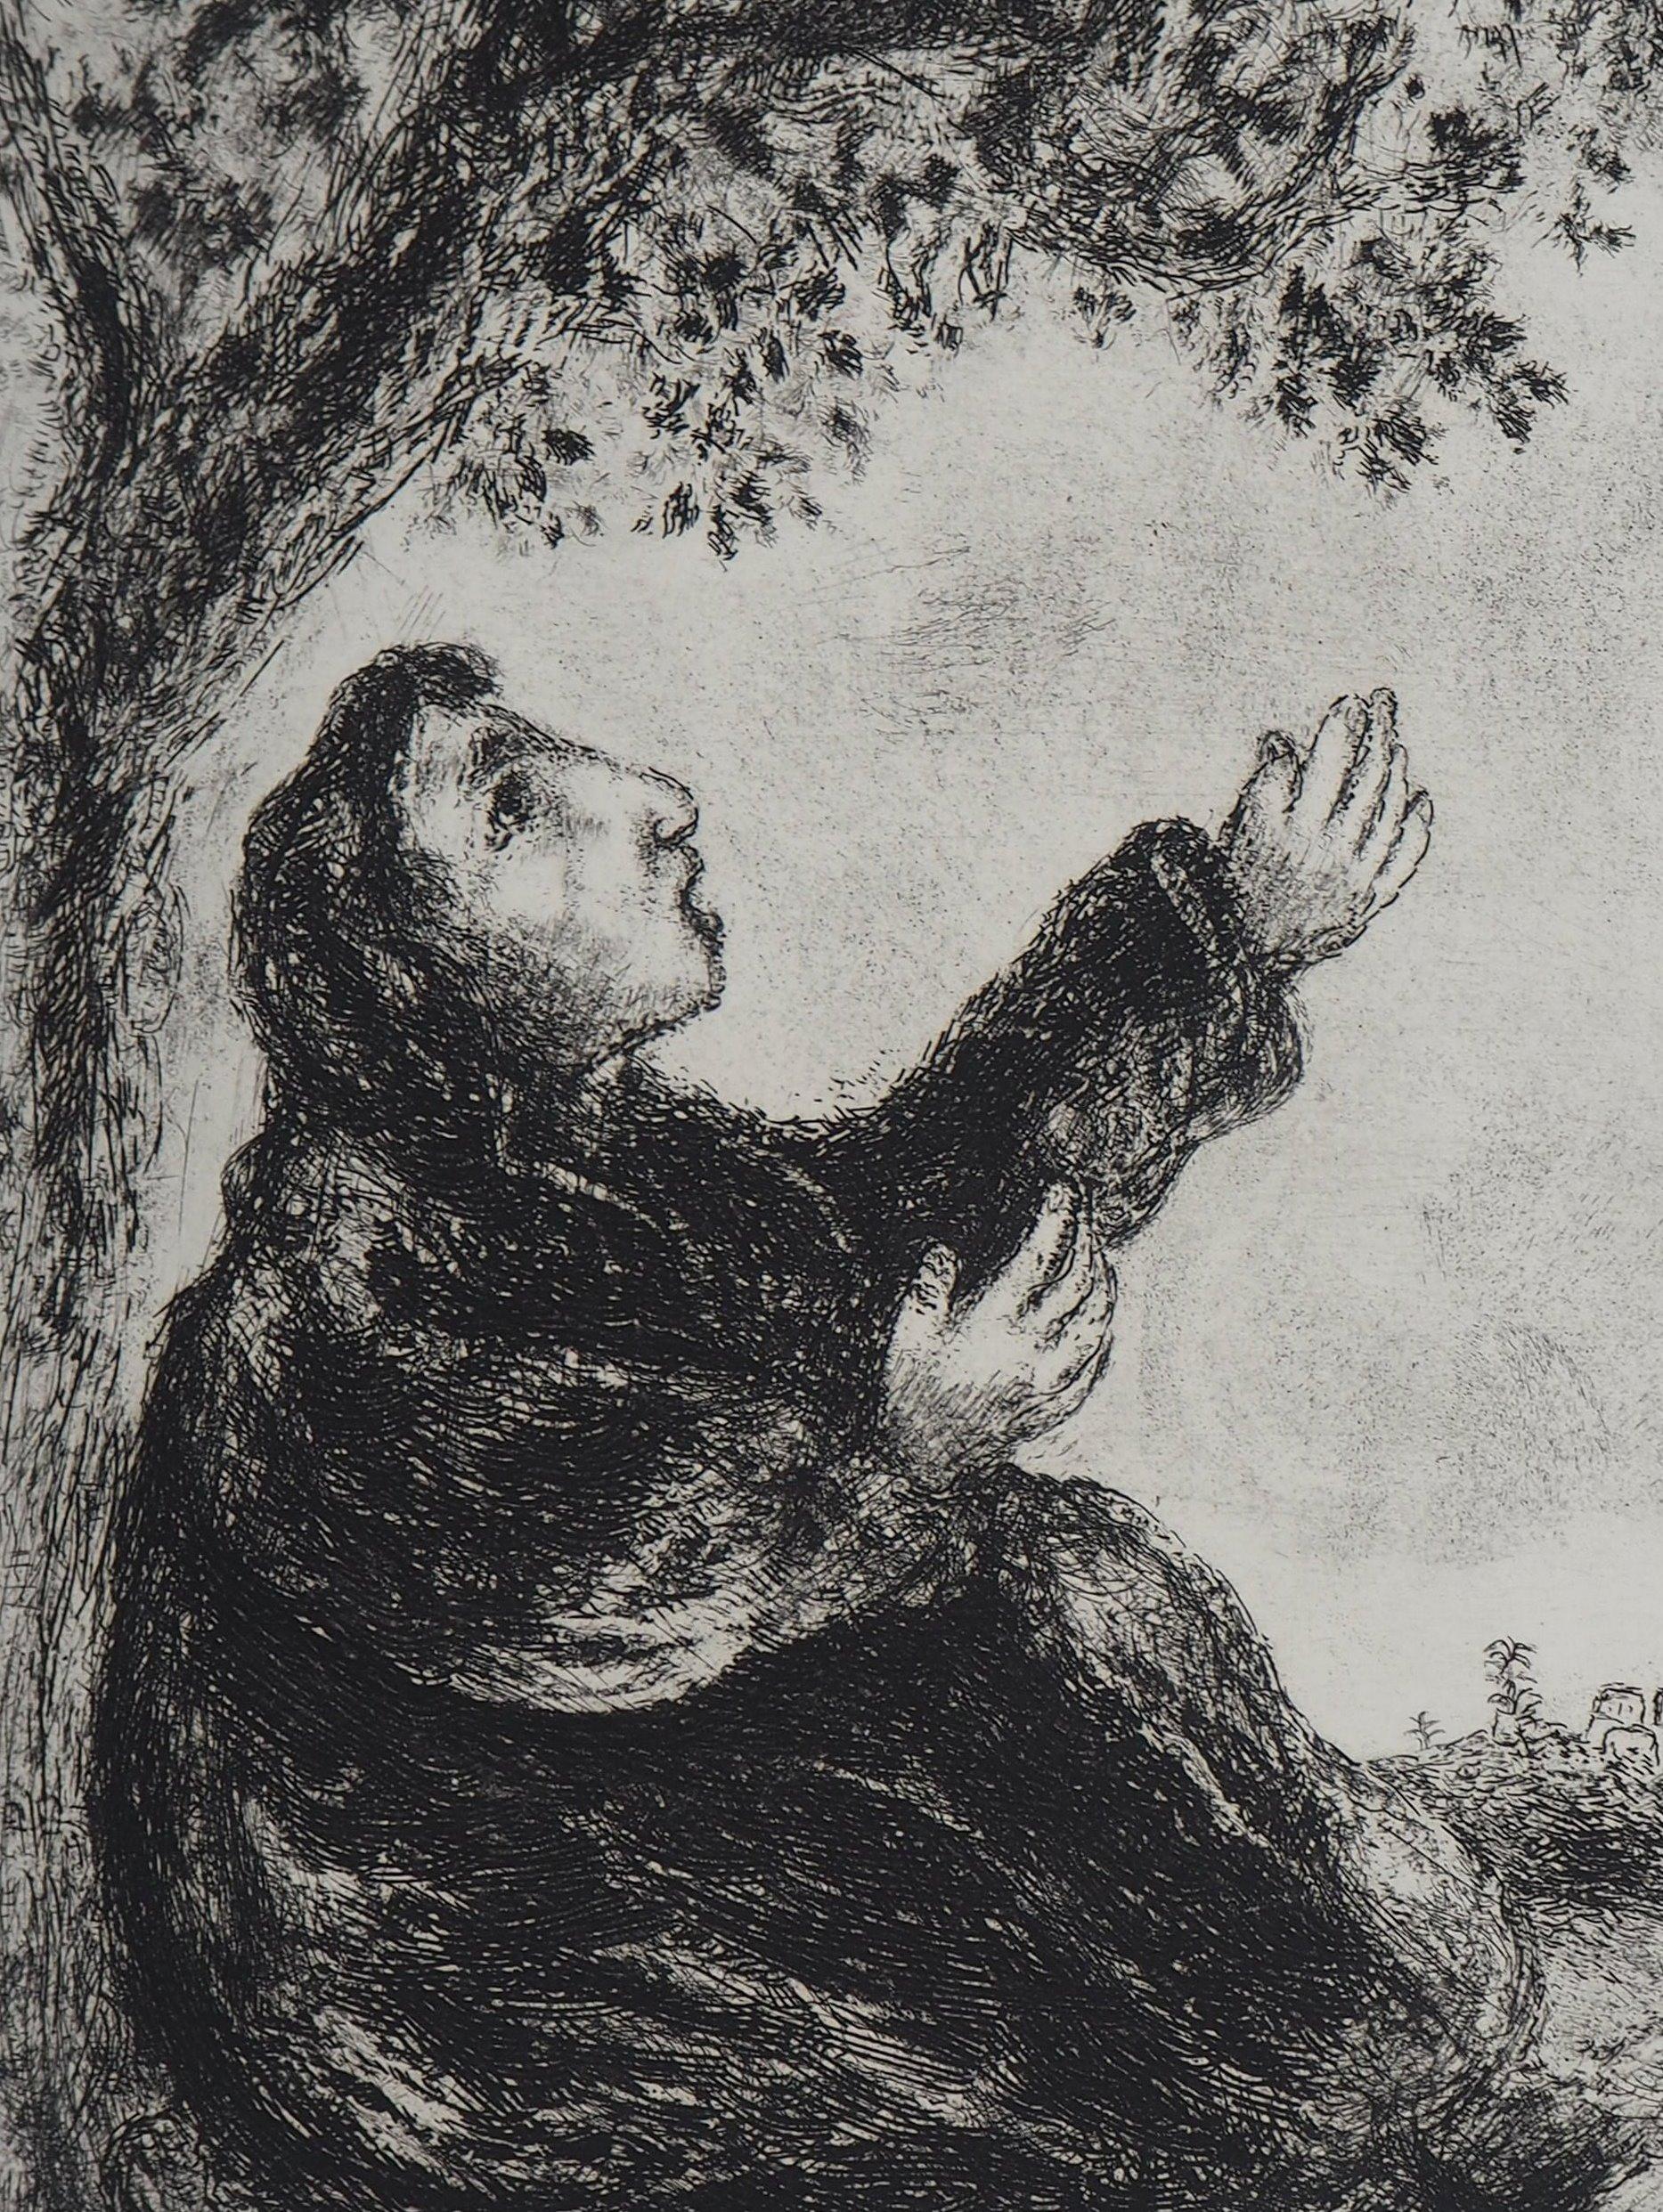 Marc Chagall (1887-1958)
Bible: Deborah the Prophetess (Débora la Prophétesse), 1958

Original etching
Printed signature in the plate
On Montval vellum, 44,5 x 34 cm (c. 17.5 x 13.3 inch)

INFORMATION: Published by Vollard / Tériade in